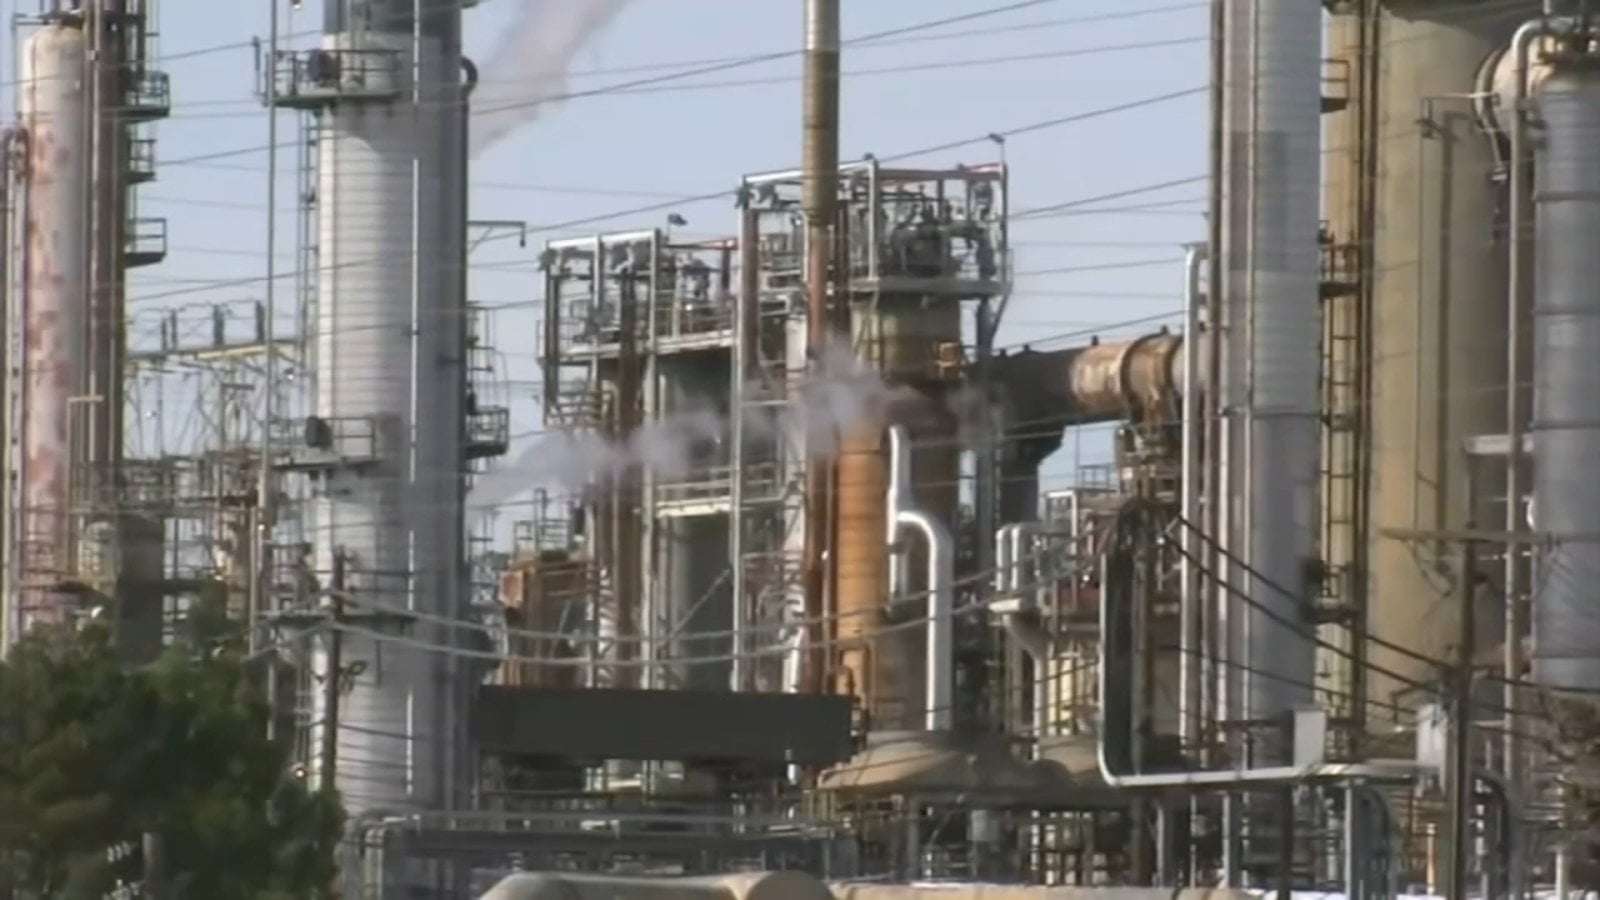 image for EXCLUSIVE: FBI launches investigation into chemical release from Martinez Refinery